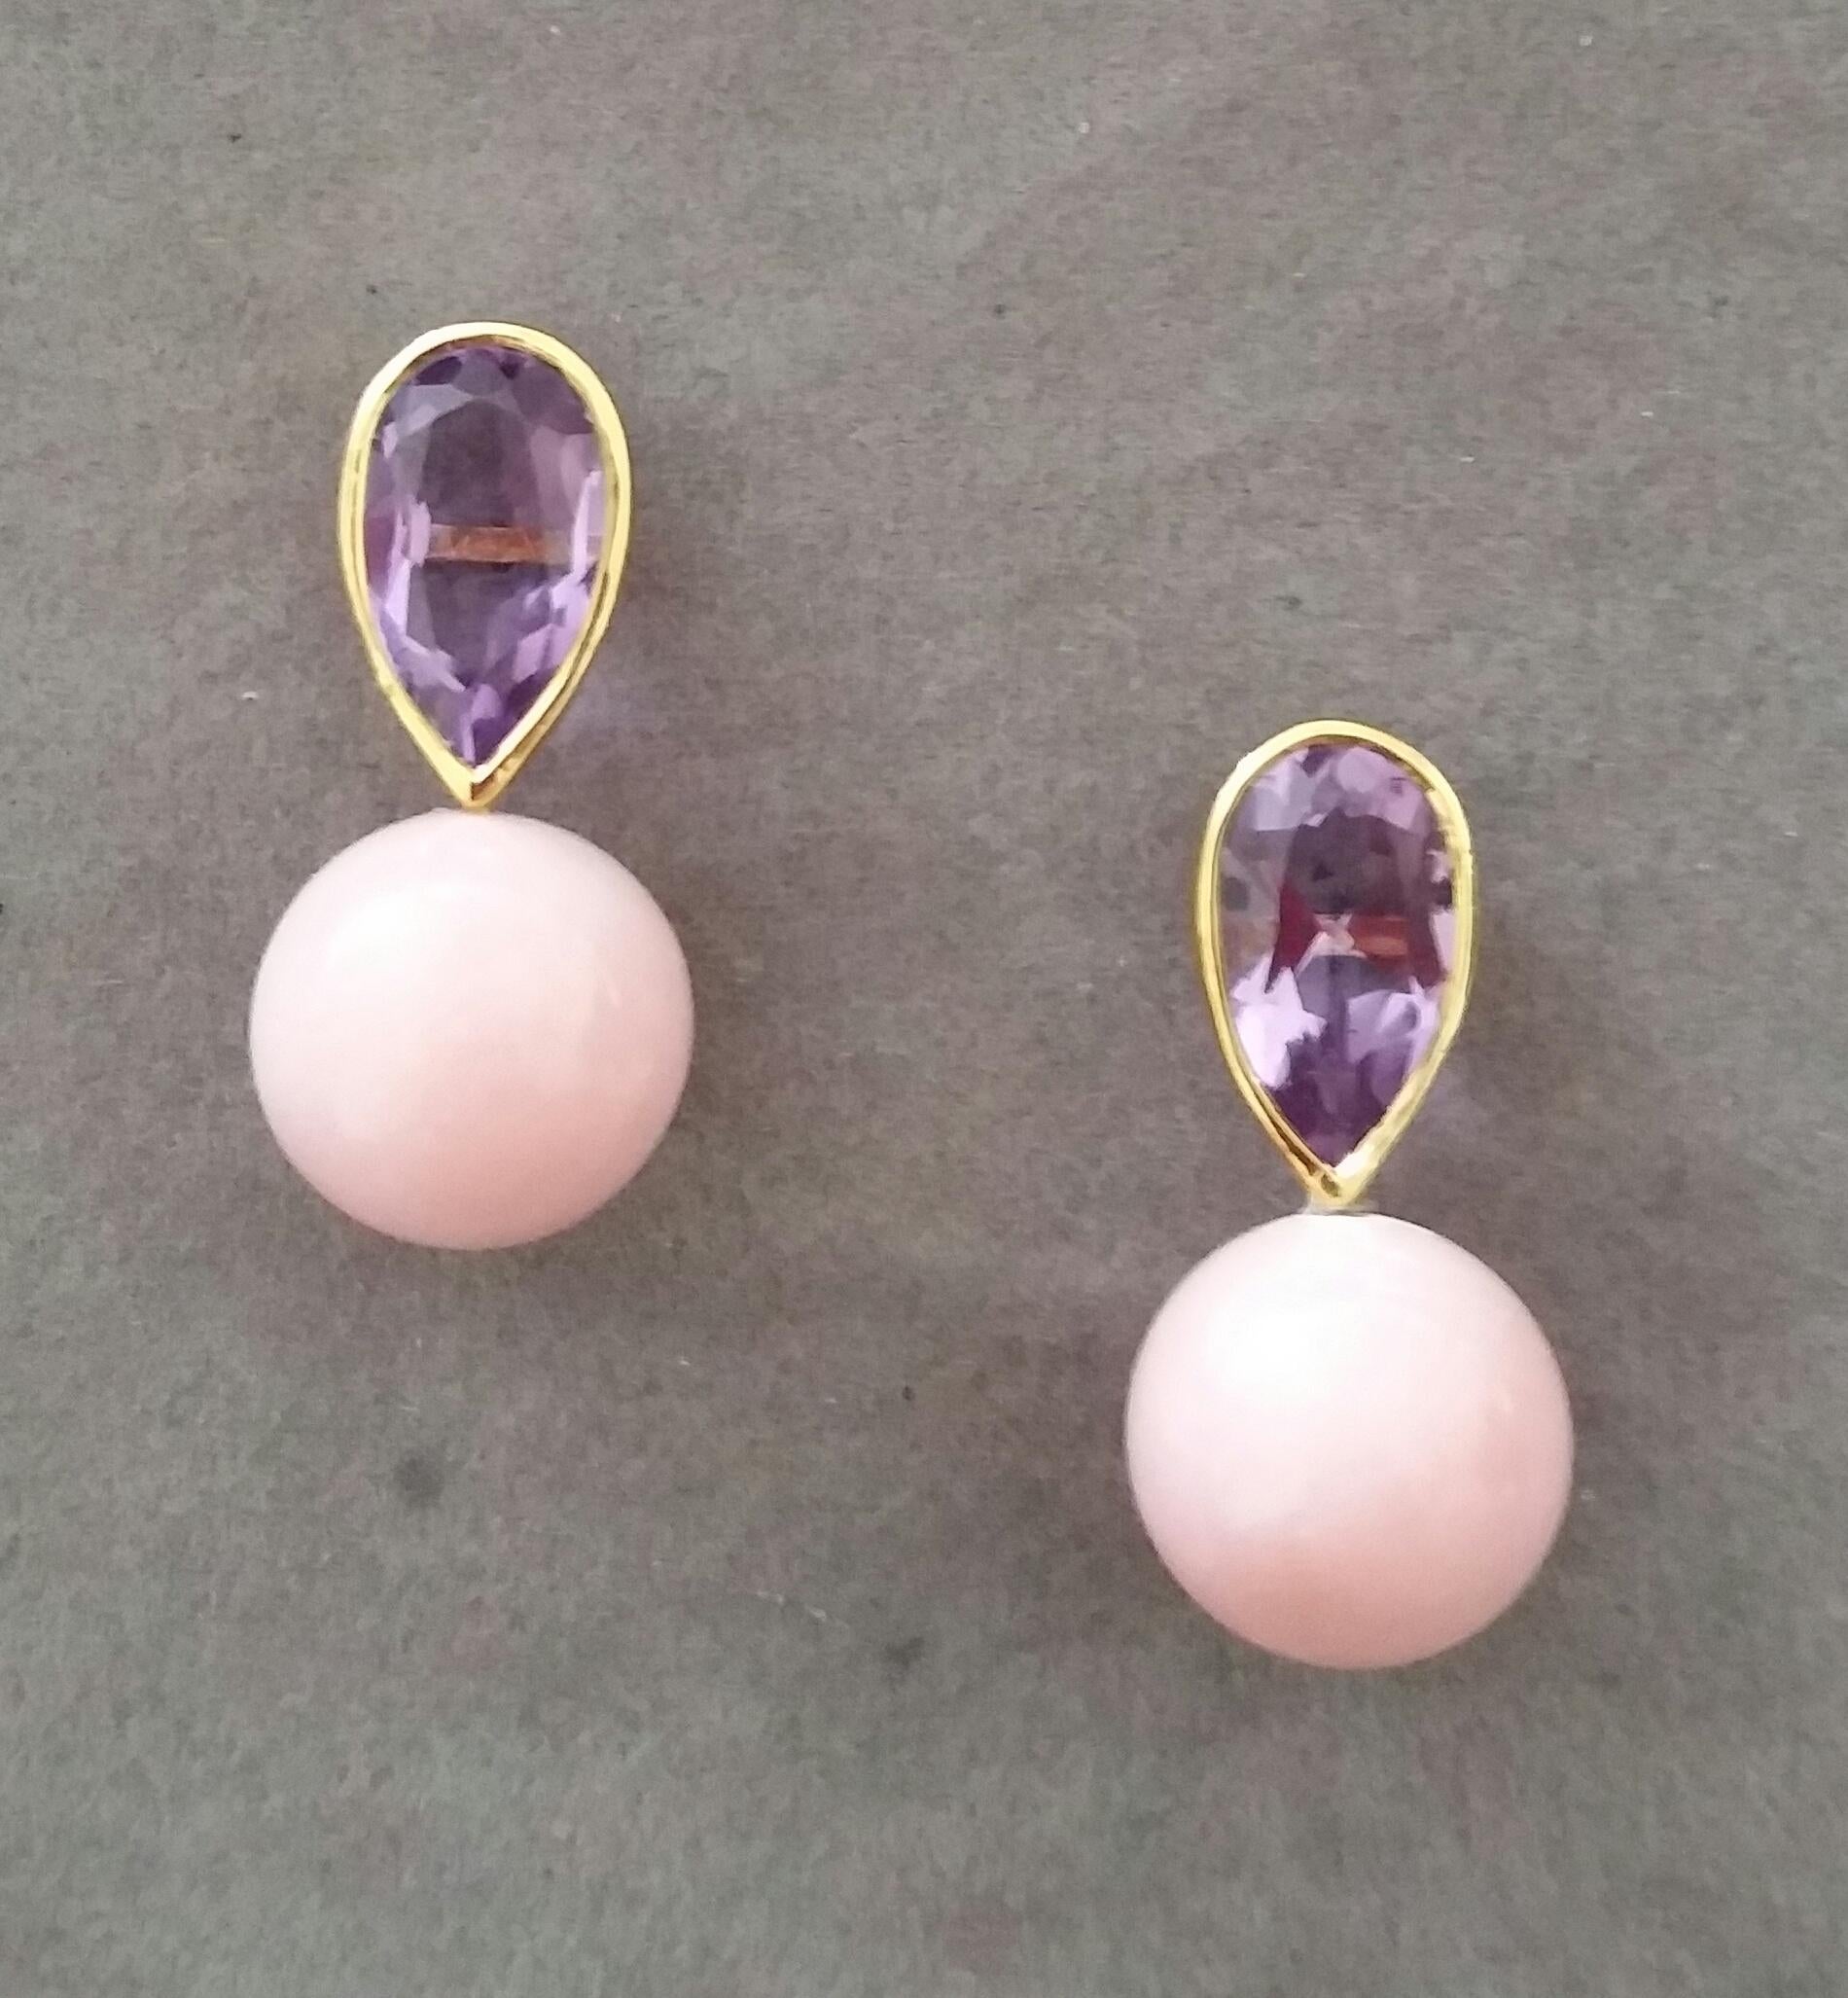 These simple but elegant handmade earrings have 2 faceted Natural Pear Shape Amethysts measuring 7 x 12 mm and weighing 4,55 carats set in yellow gold bezel at the top to which are suspended 2 Pink Opal Plain Round Beads measuring 12 mm in